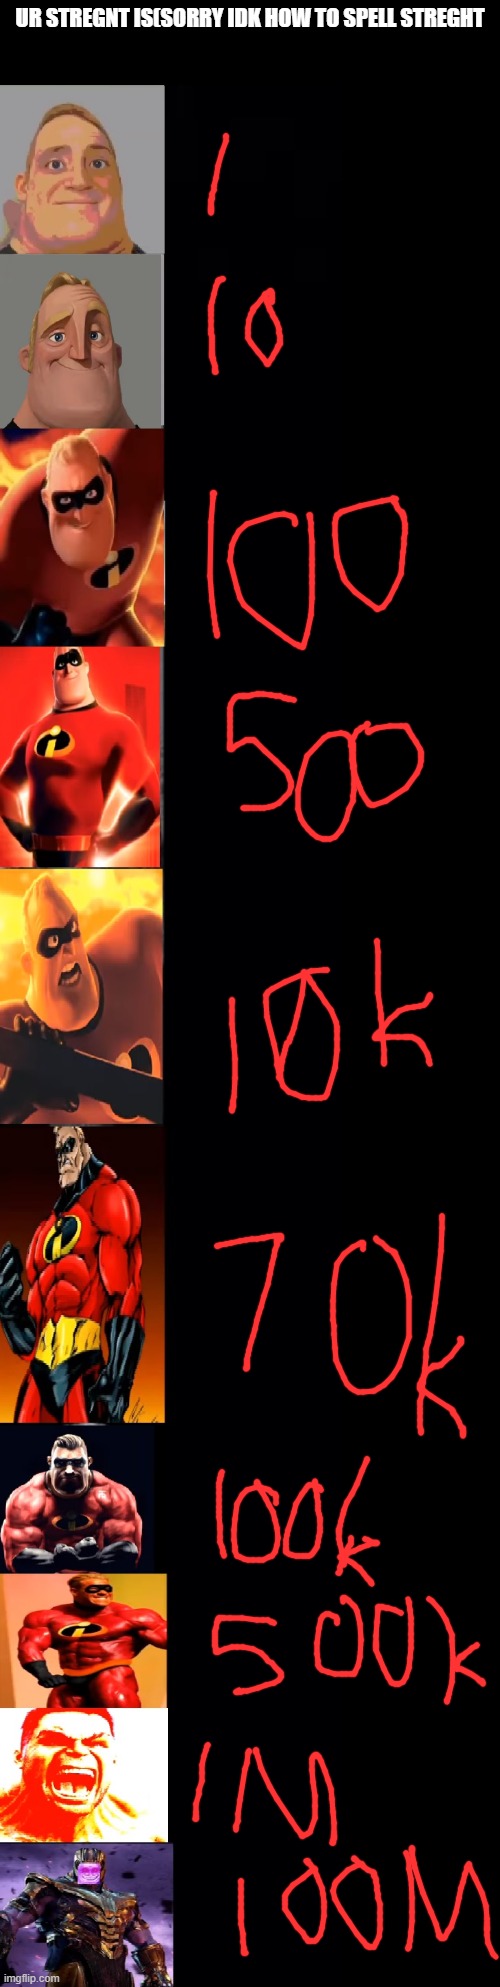 mr incredible becoming strong | UR STREGNT IS(SORRY IDK HOW TO SPELL STREGHT | image tagged in mr incredible becoming strong | made w/ Imgflip meme maker